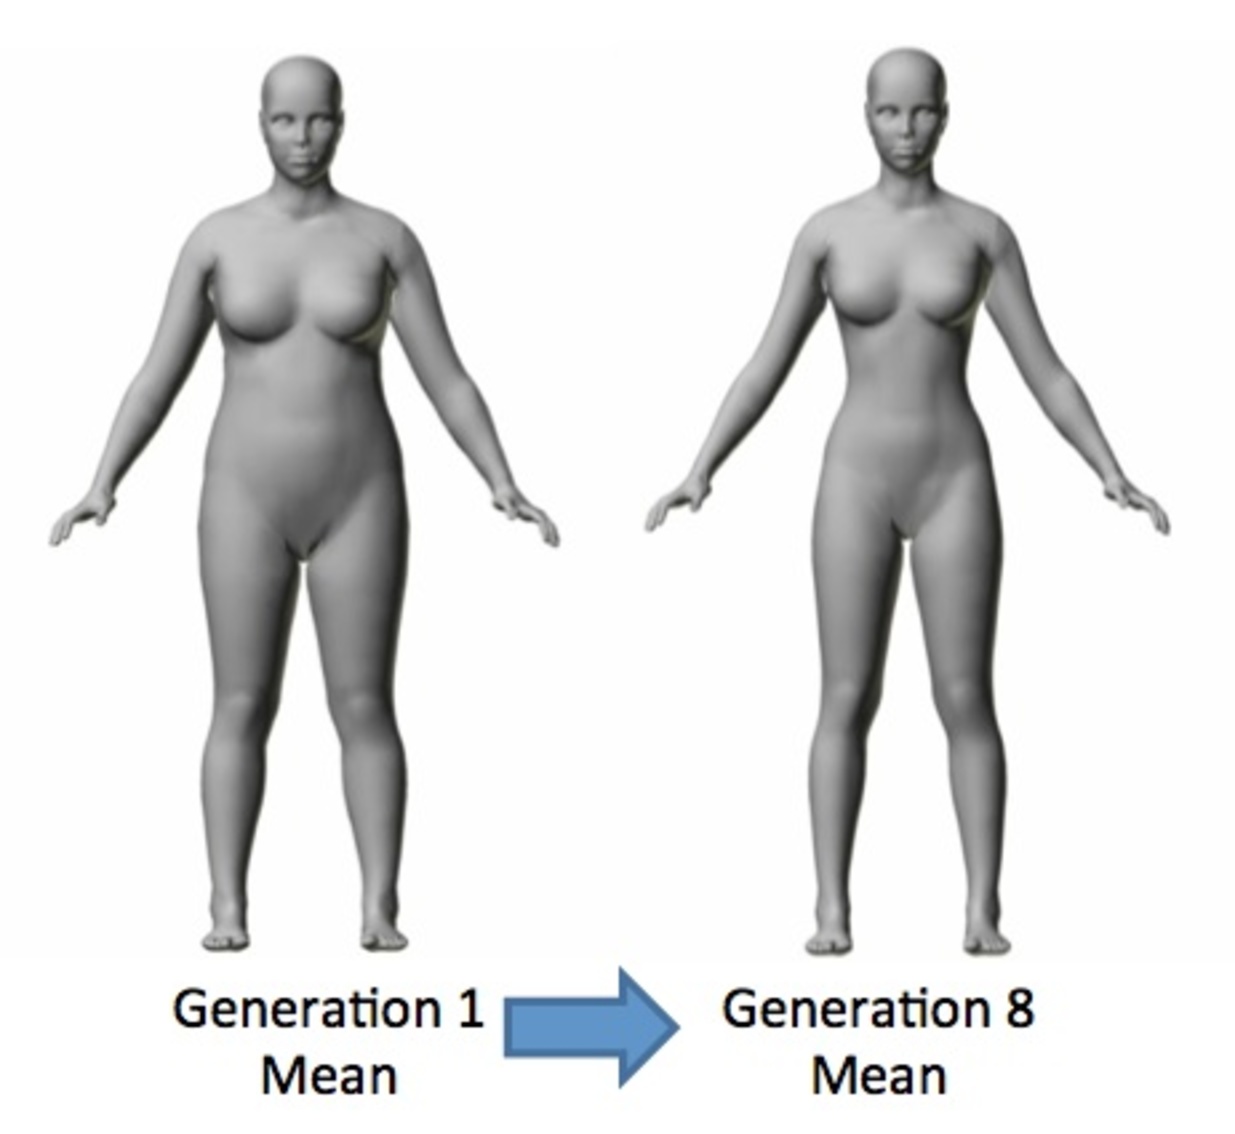 Body A and C are the ideal female bodies set by the female and male